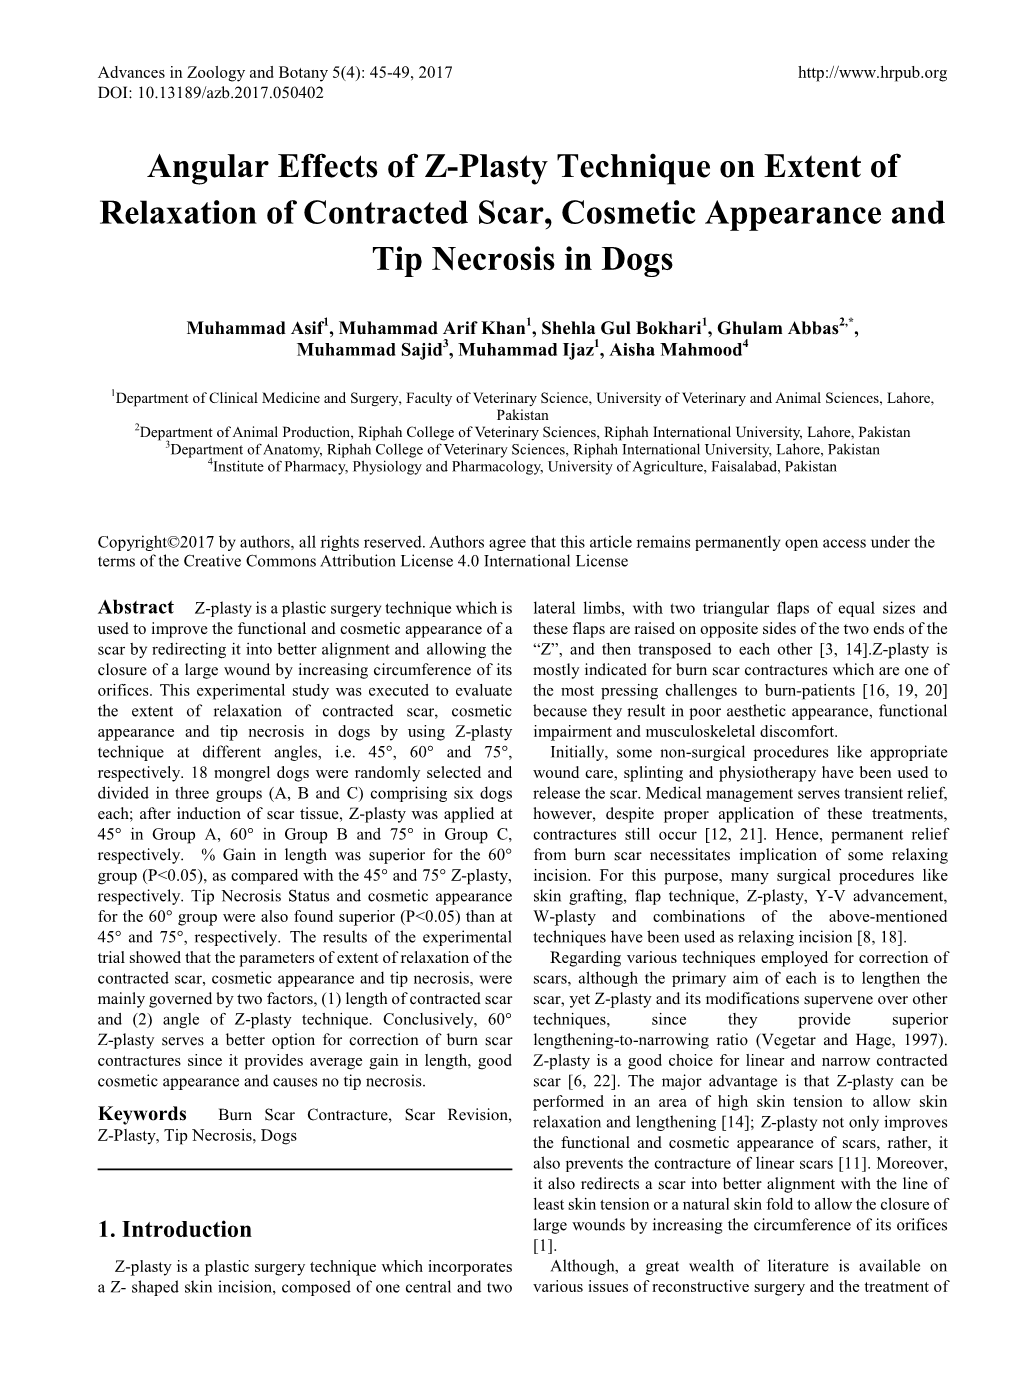 Angular Effects of Z-Plasty Technique on Extent of Relaxation of Contracted Scar, Cosmetic Appearance and Tip Necrosis in Dogs